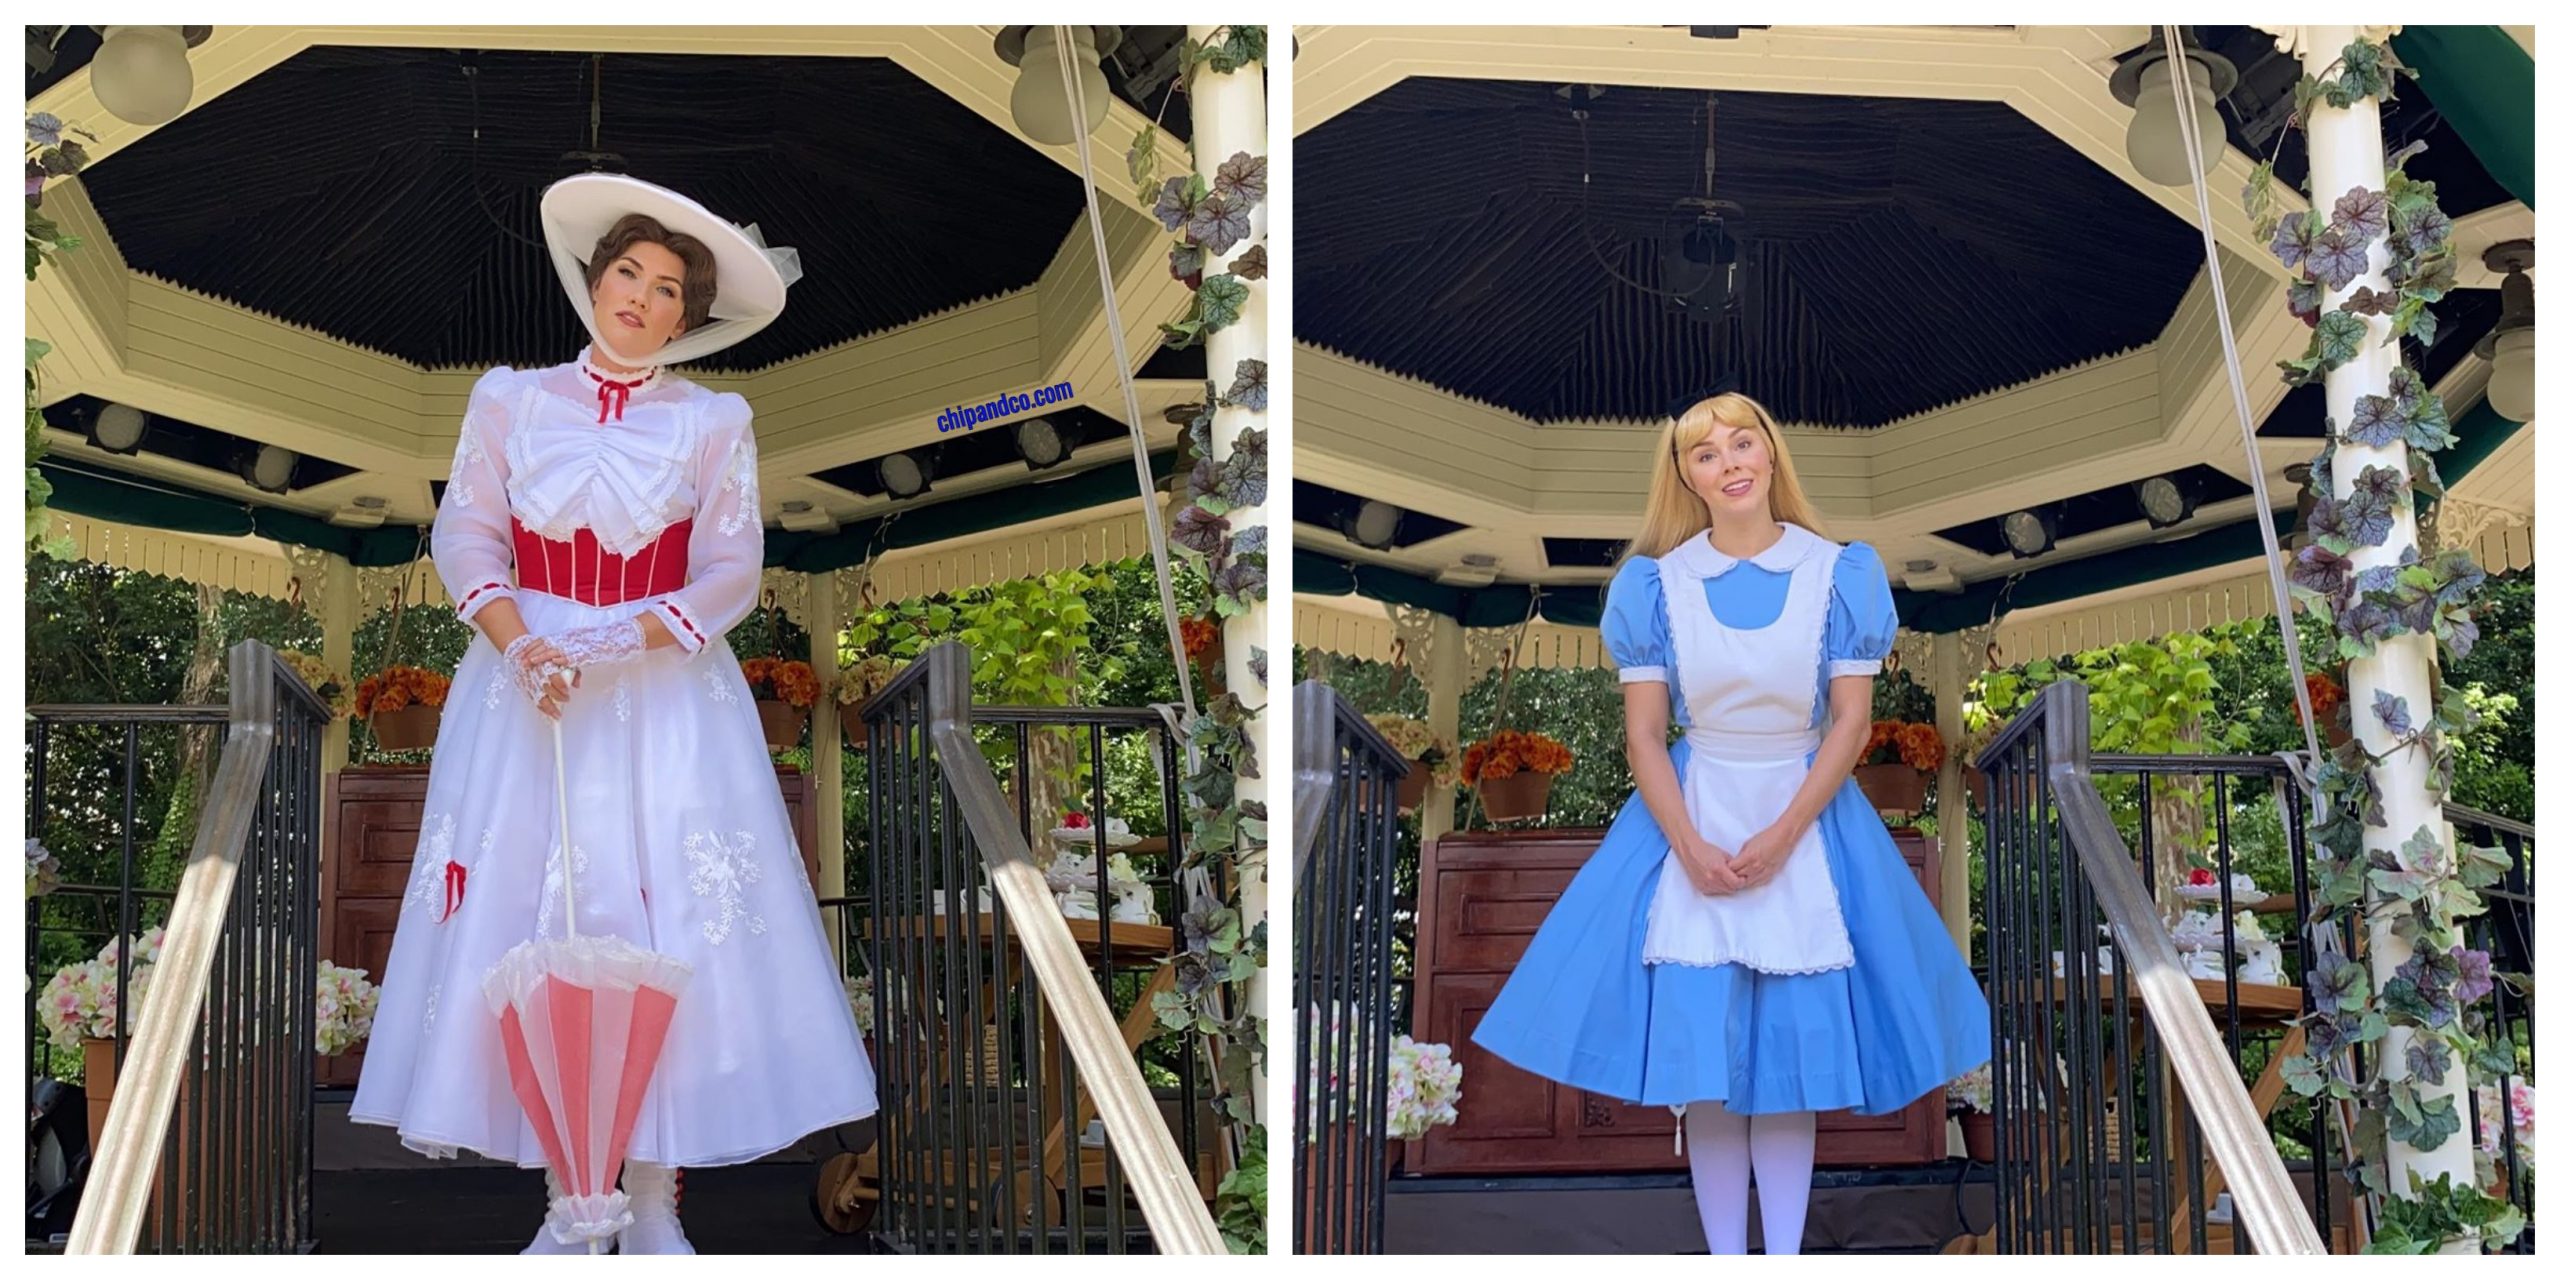 This Mary Poppins And Alice Character Experience Is Practically Perfect In Every Way!